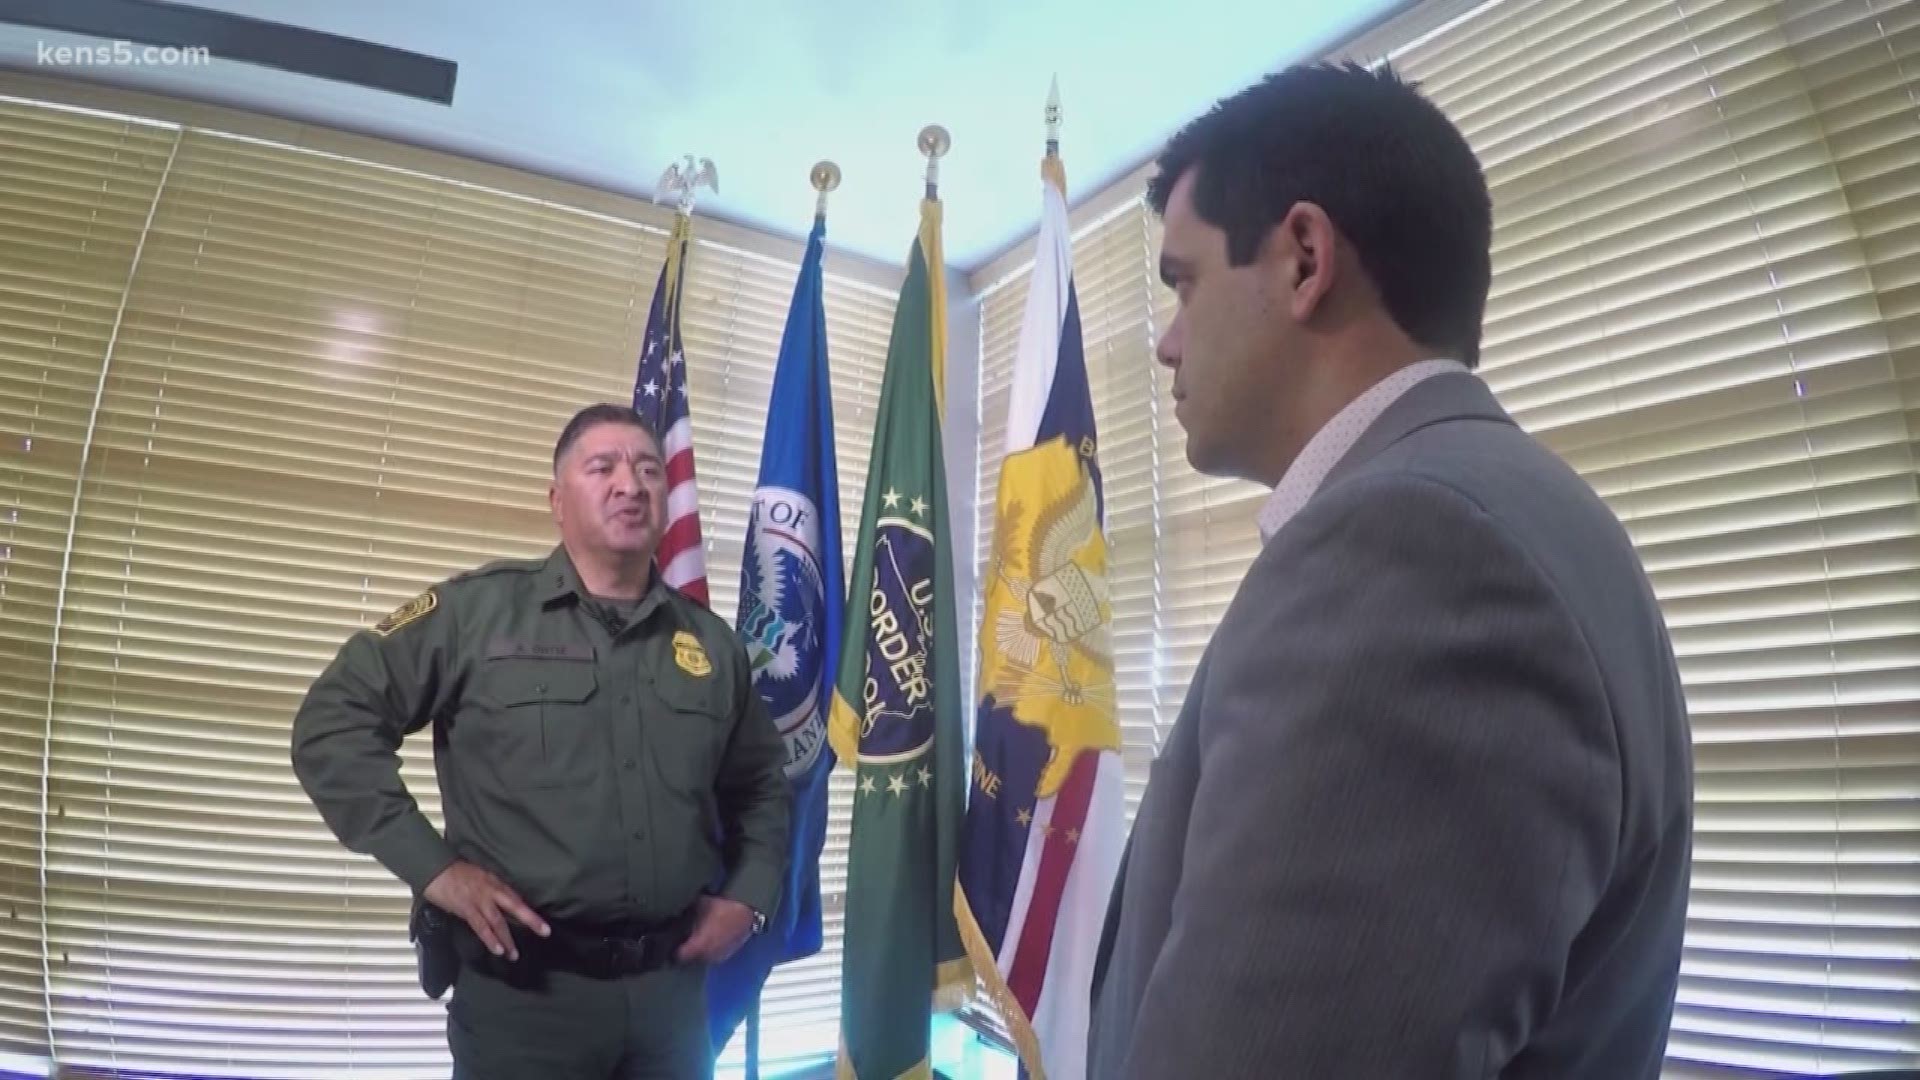 Border Patrol agents spent tonight preparing for the president's visit. But ironically, they're dealing with limited man-power because of the shutdown. Our border reporter Oscar Margain shows us how the agency has handled the shortage.